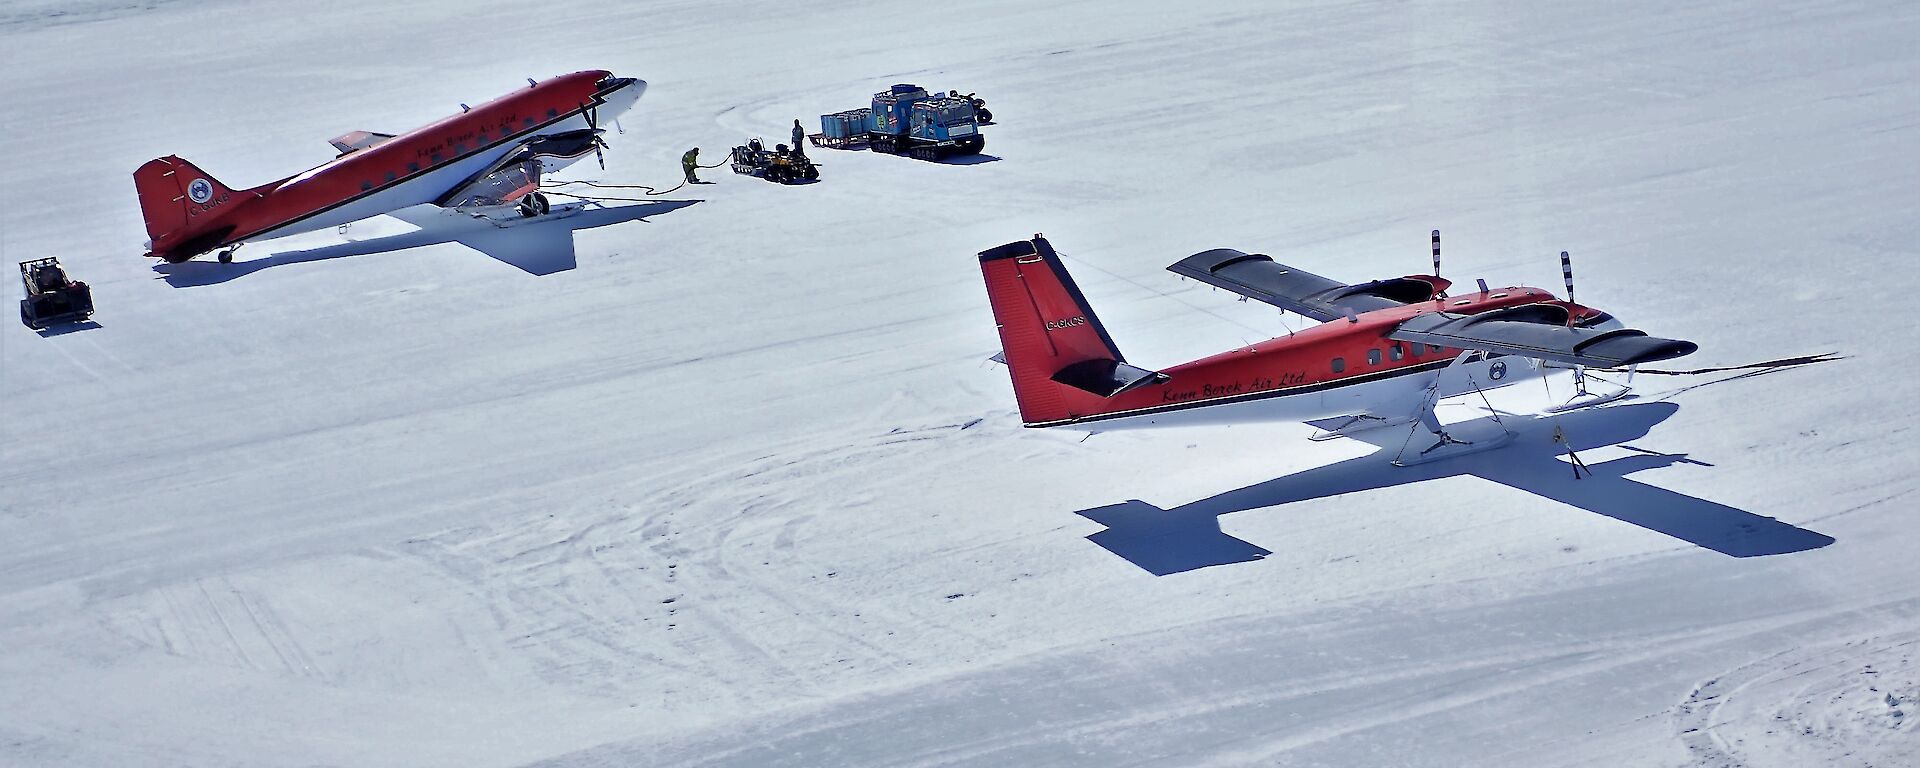 Two red planes parked on the ice